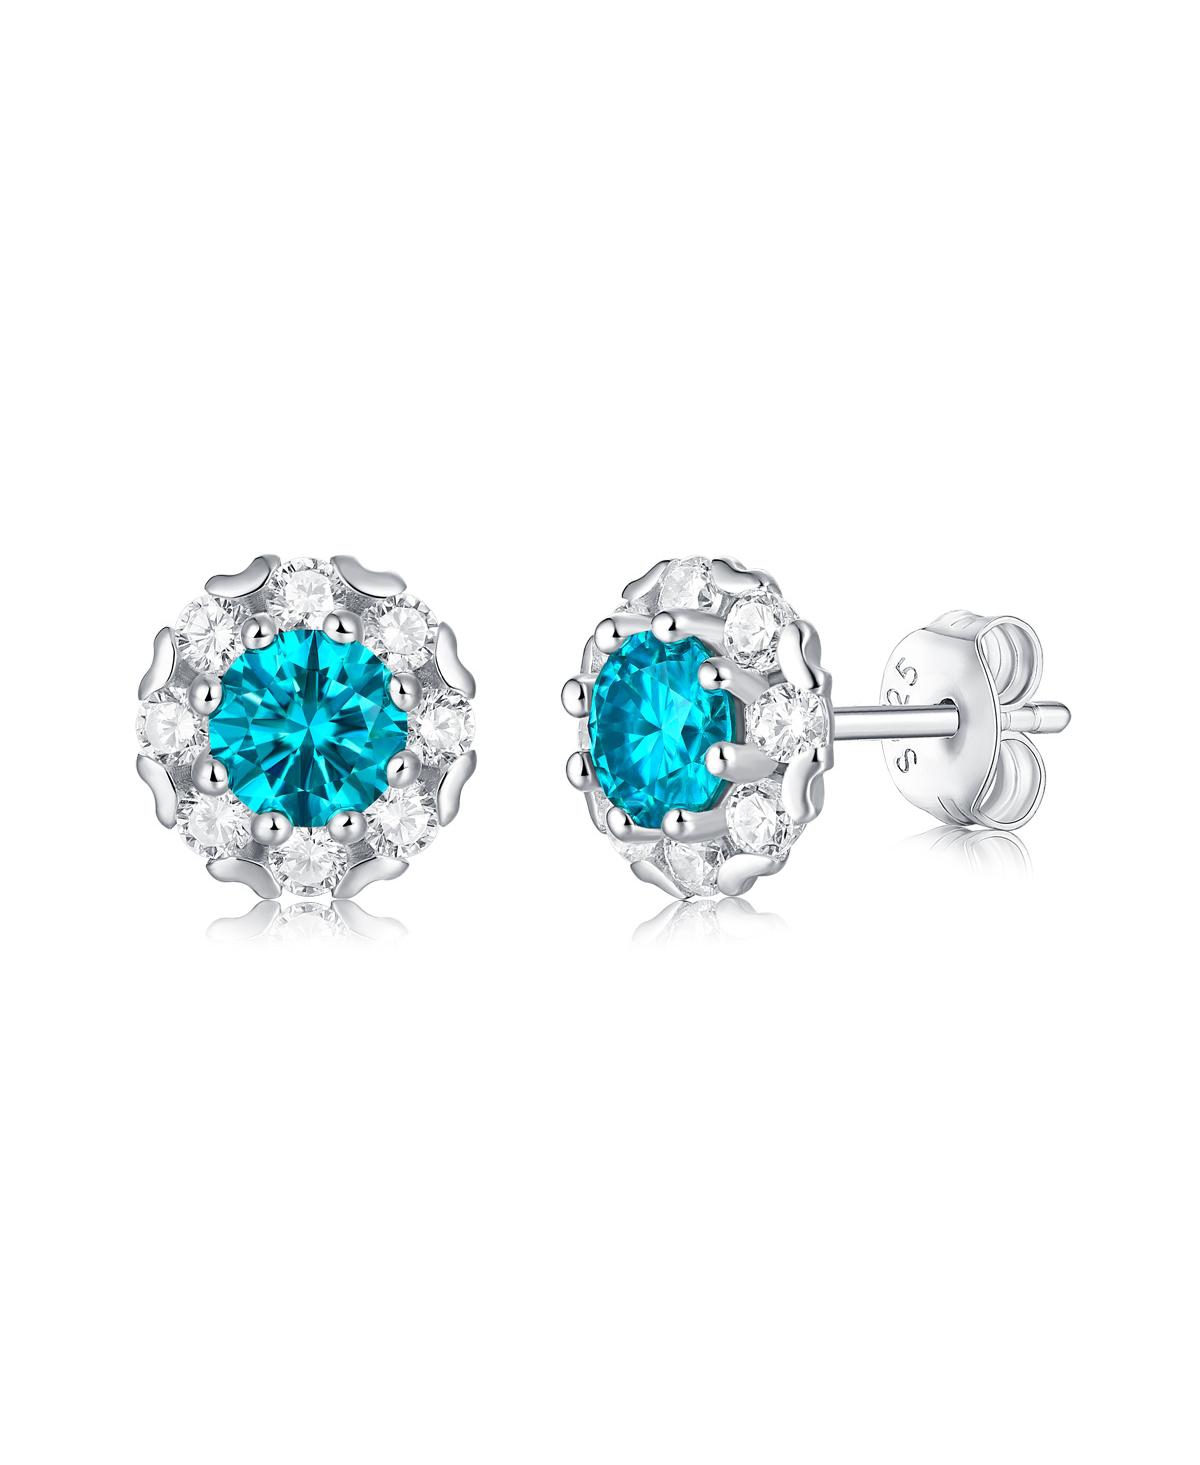 STELLA VALENTINO RADIANT STERLING SILVER ROUND HALO STUD EARRINGS WITH 0.50CTW LAB-CREATED MOISSANITE & BLUE TOPAZ, W